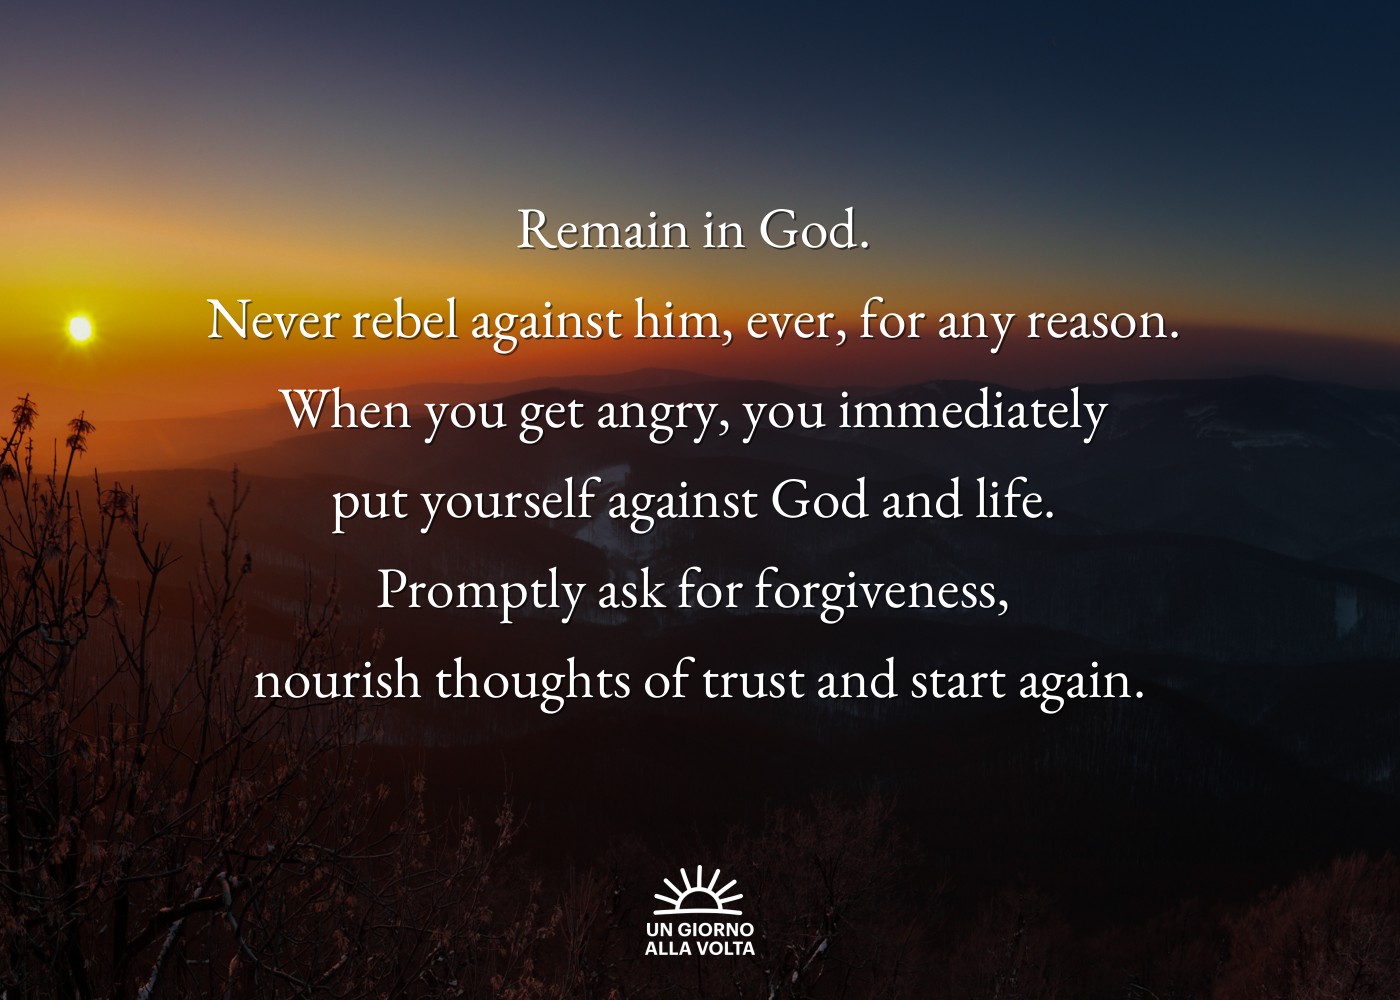 Remain in God. 
Never rebel against him, ever, for any reason. 
When you get angry, you immediately 
put yourself against God and life. 
Promptly ask for forgiveness, 
nourish thoughts of trust and start again.
